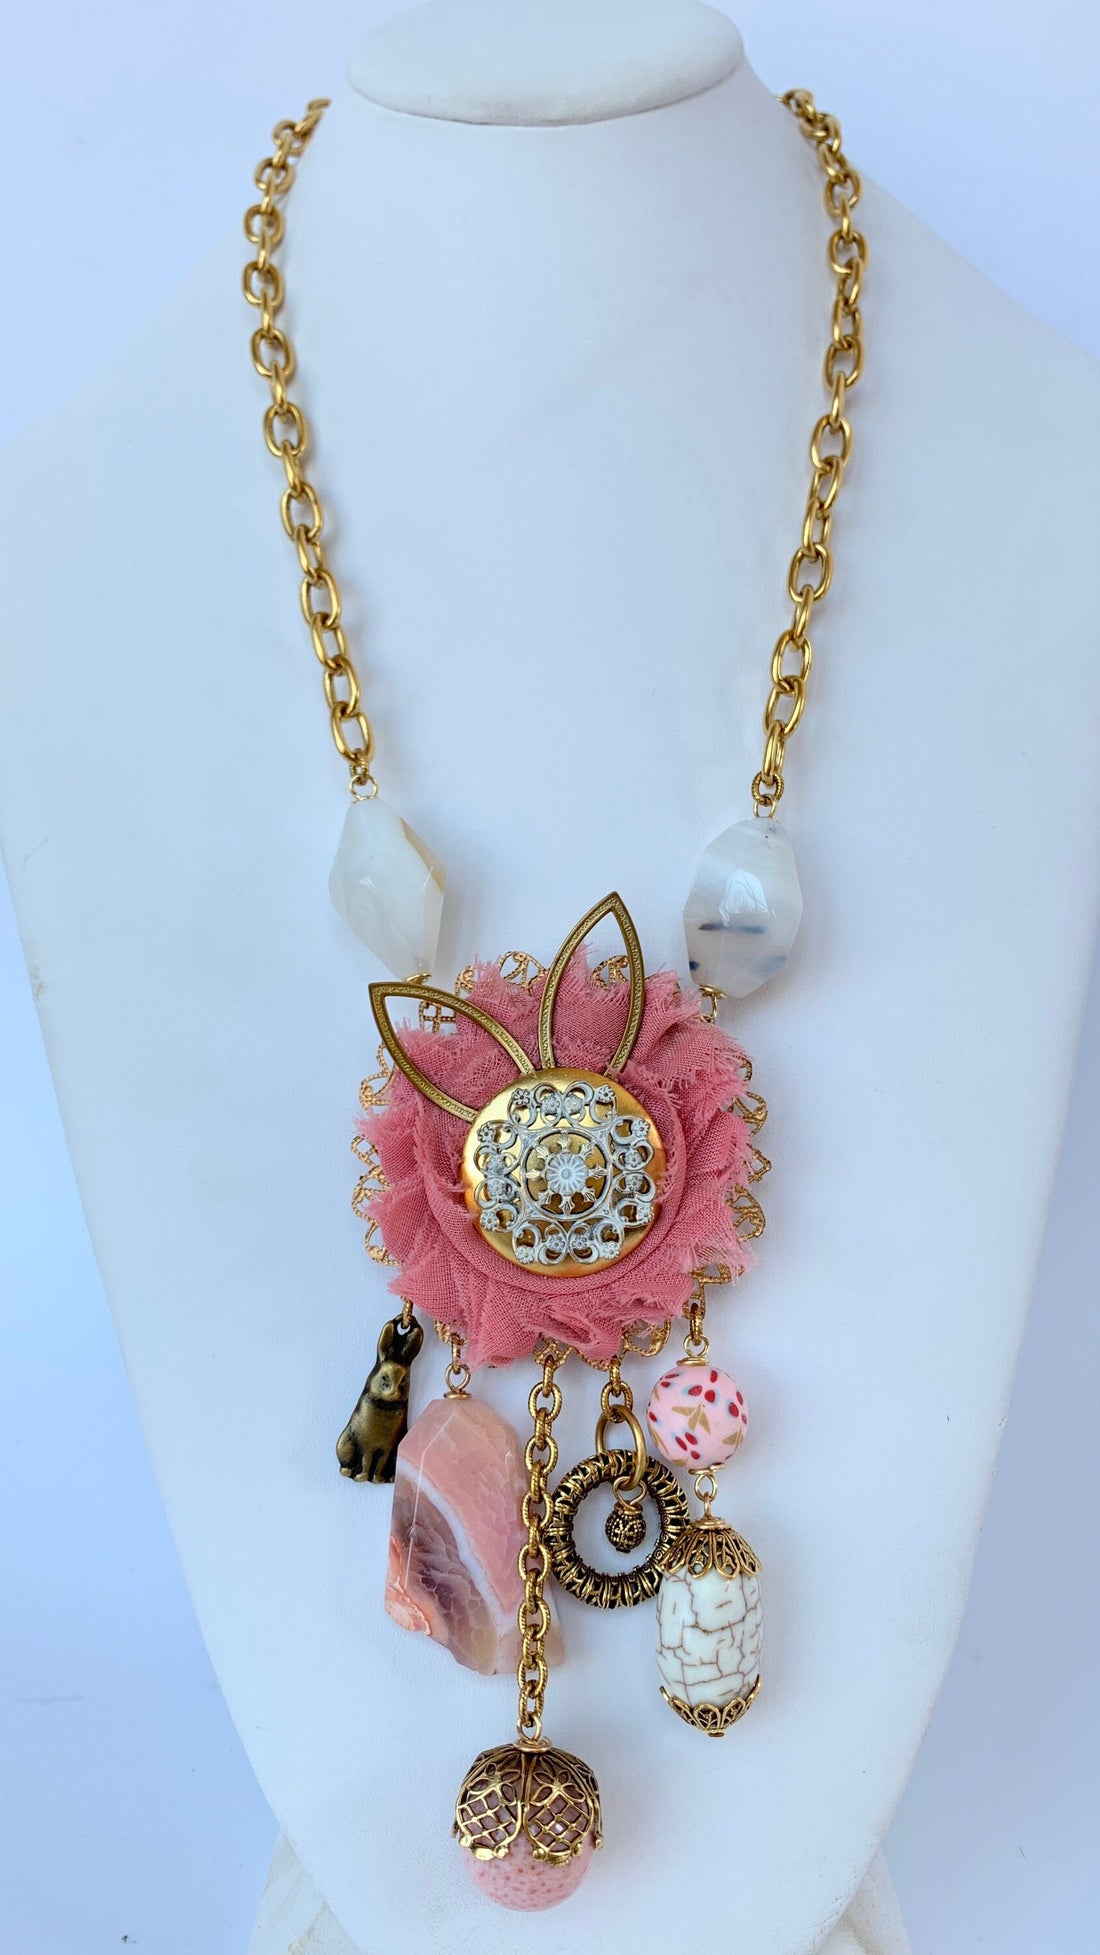 Lenora Dame Bunny Hop Statement Necklace in Delicate Pink- One of a Kind